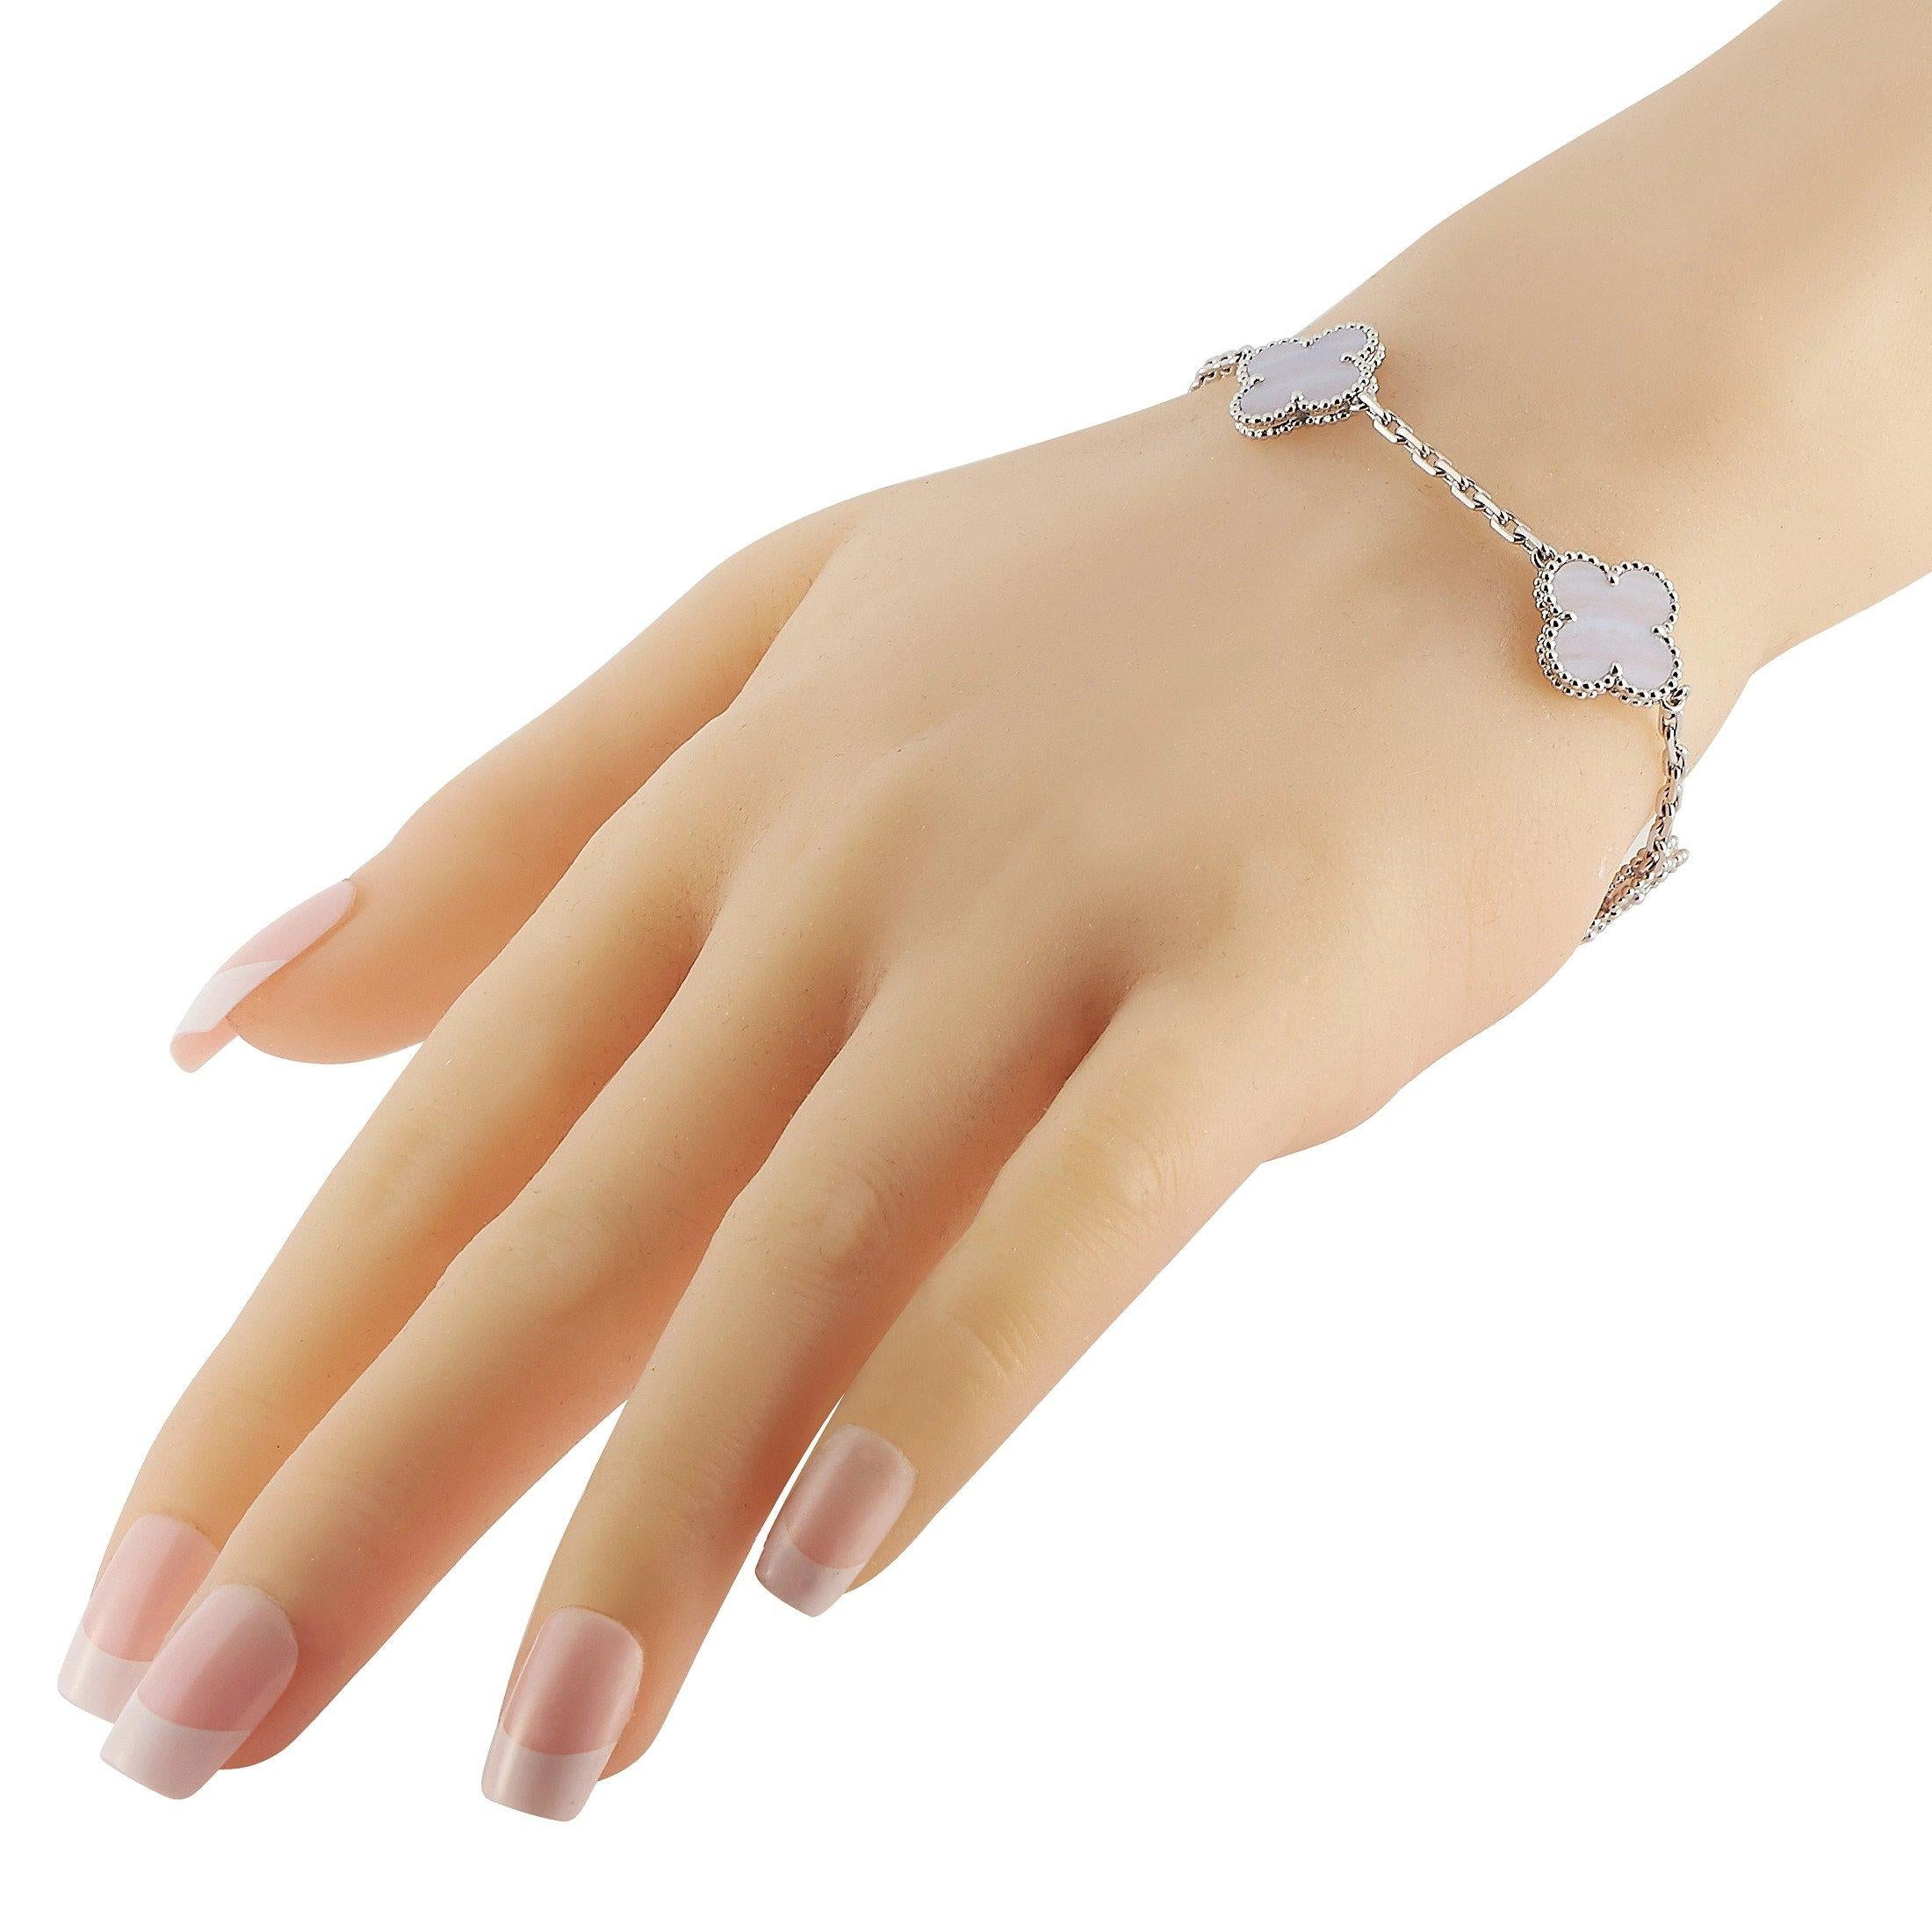 The Van Cleef & Arpels iconic Alhambra symbol makes this vintage bracelet incredibly iconic. Each clover-shaped charm is accented by Chalcedony and comes complete with delicate millegrain details. This piece is crafted from 18K White Gold and